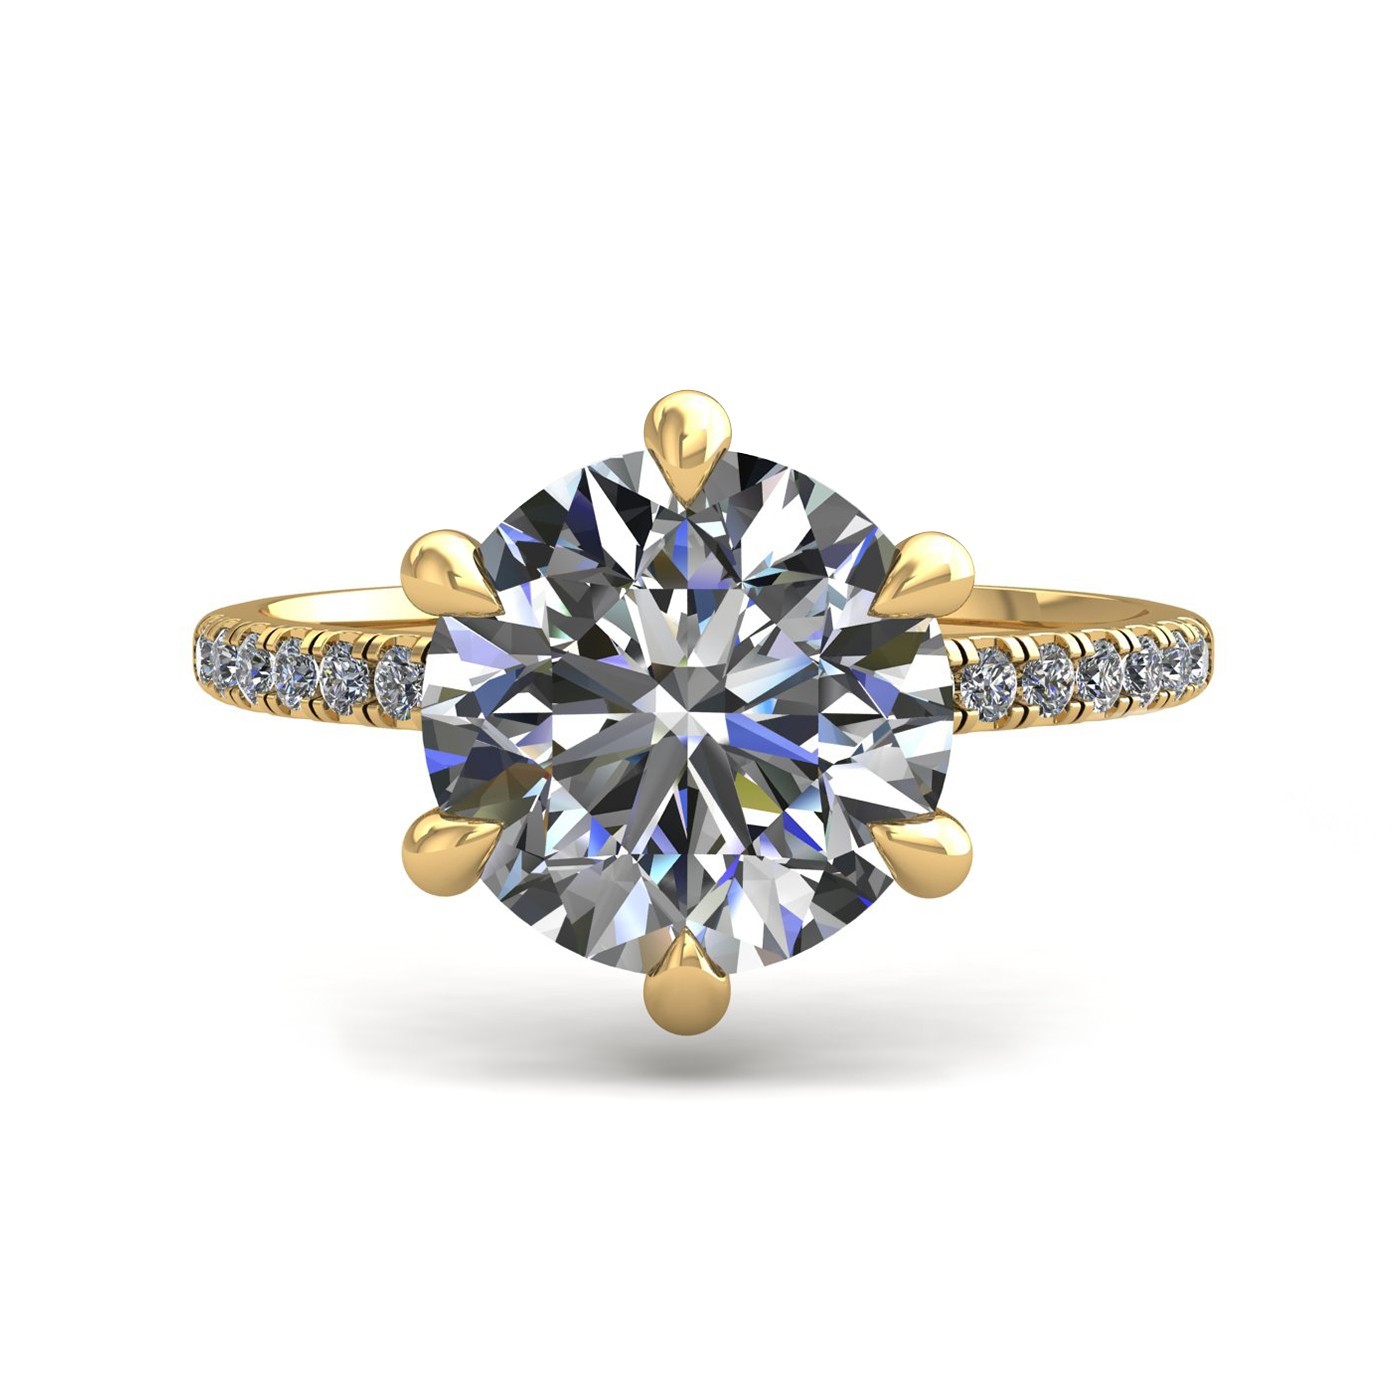 18k yellow gold 2,00 ct 6 prongs round cut diamond engagement ring with whisper thin pavÉ set band Photos & images